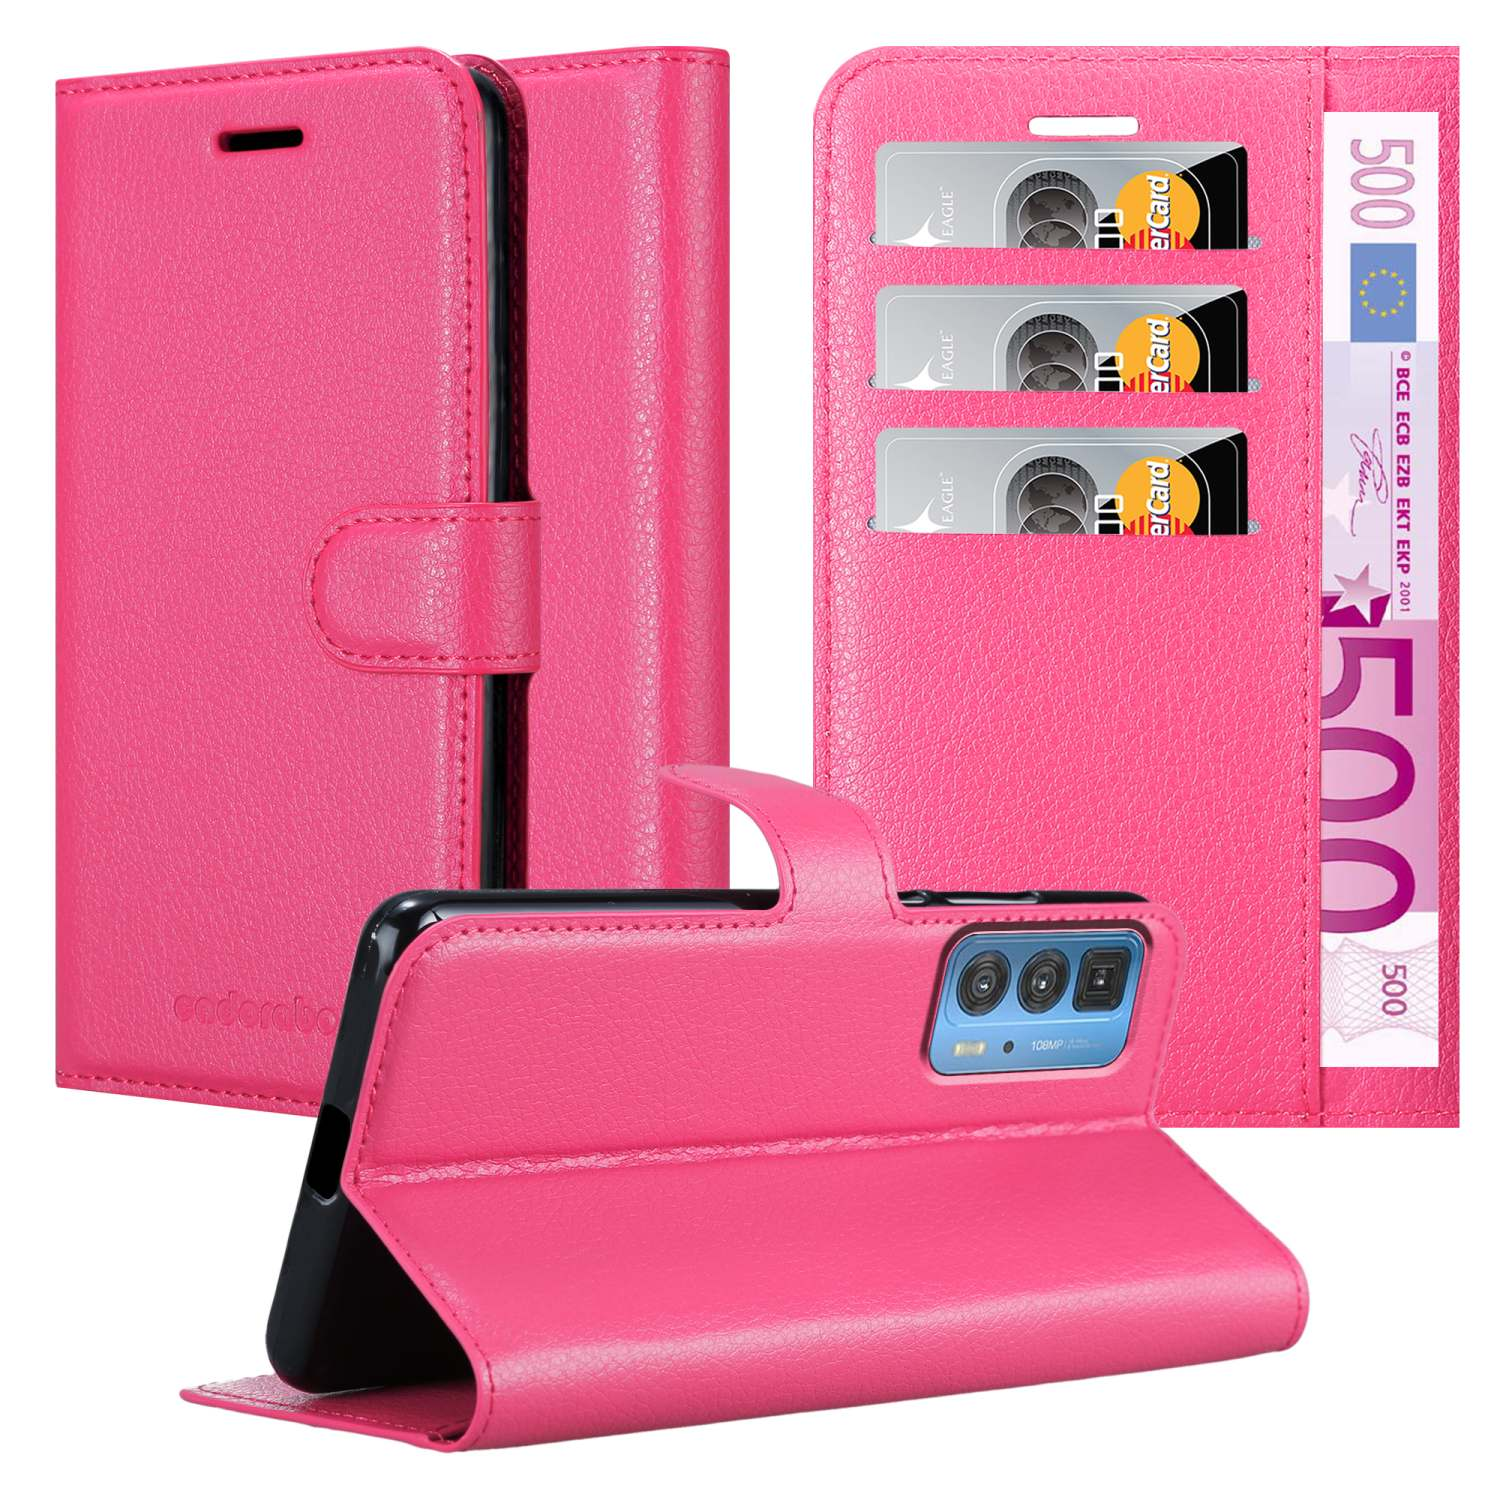 EDGE PINK Motorola, 20 Standfunktion, PRO, S / CHERRY EDGE CADORABO Hülle Bookcover, PRO Book